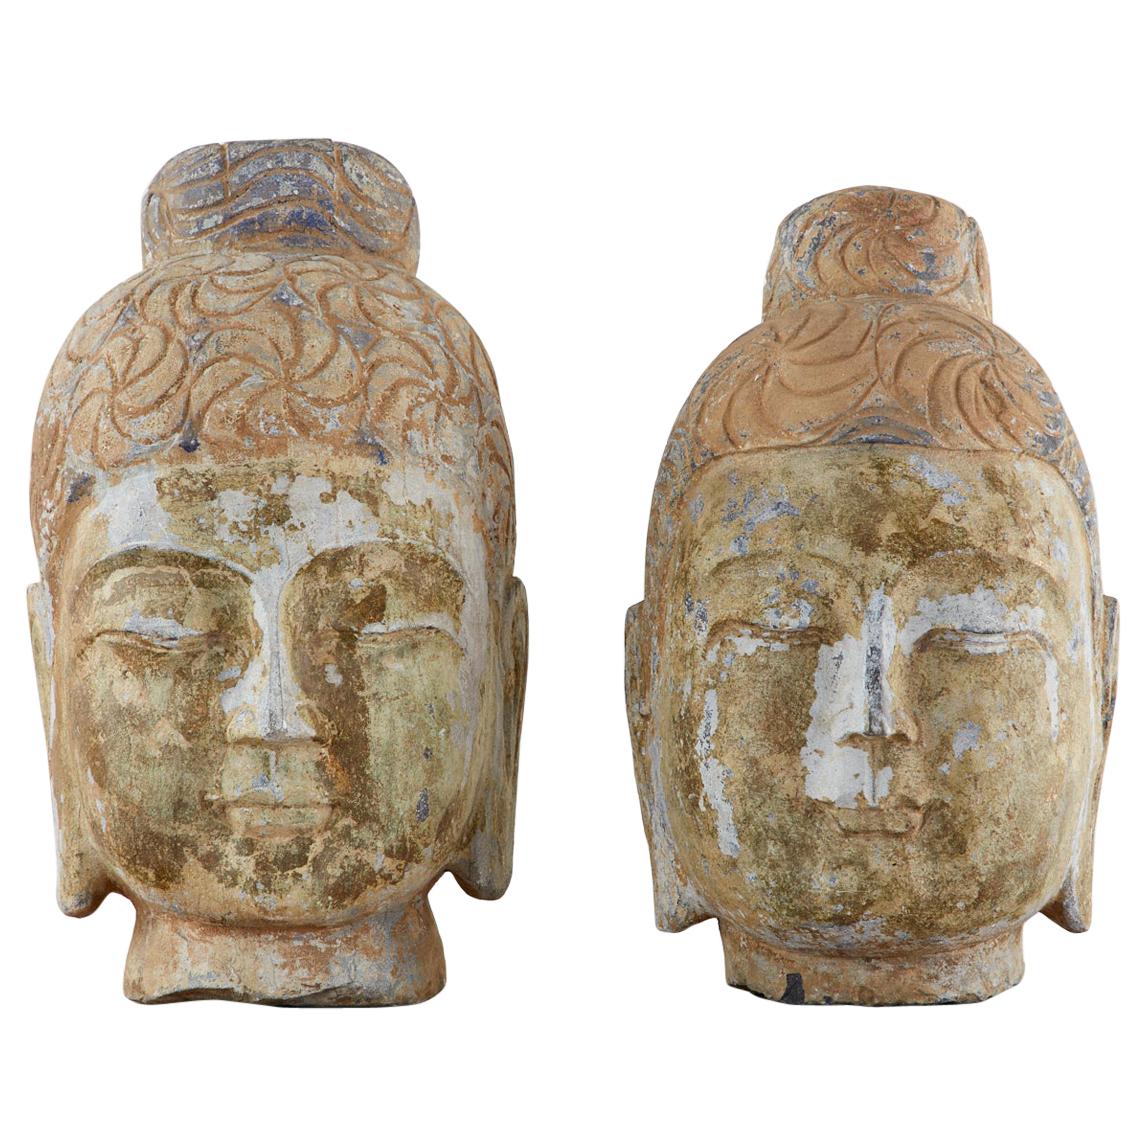 Pair of Associated Chinese Style Carved Stone Buddha Head Busts